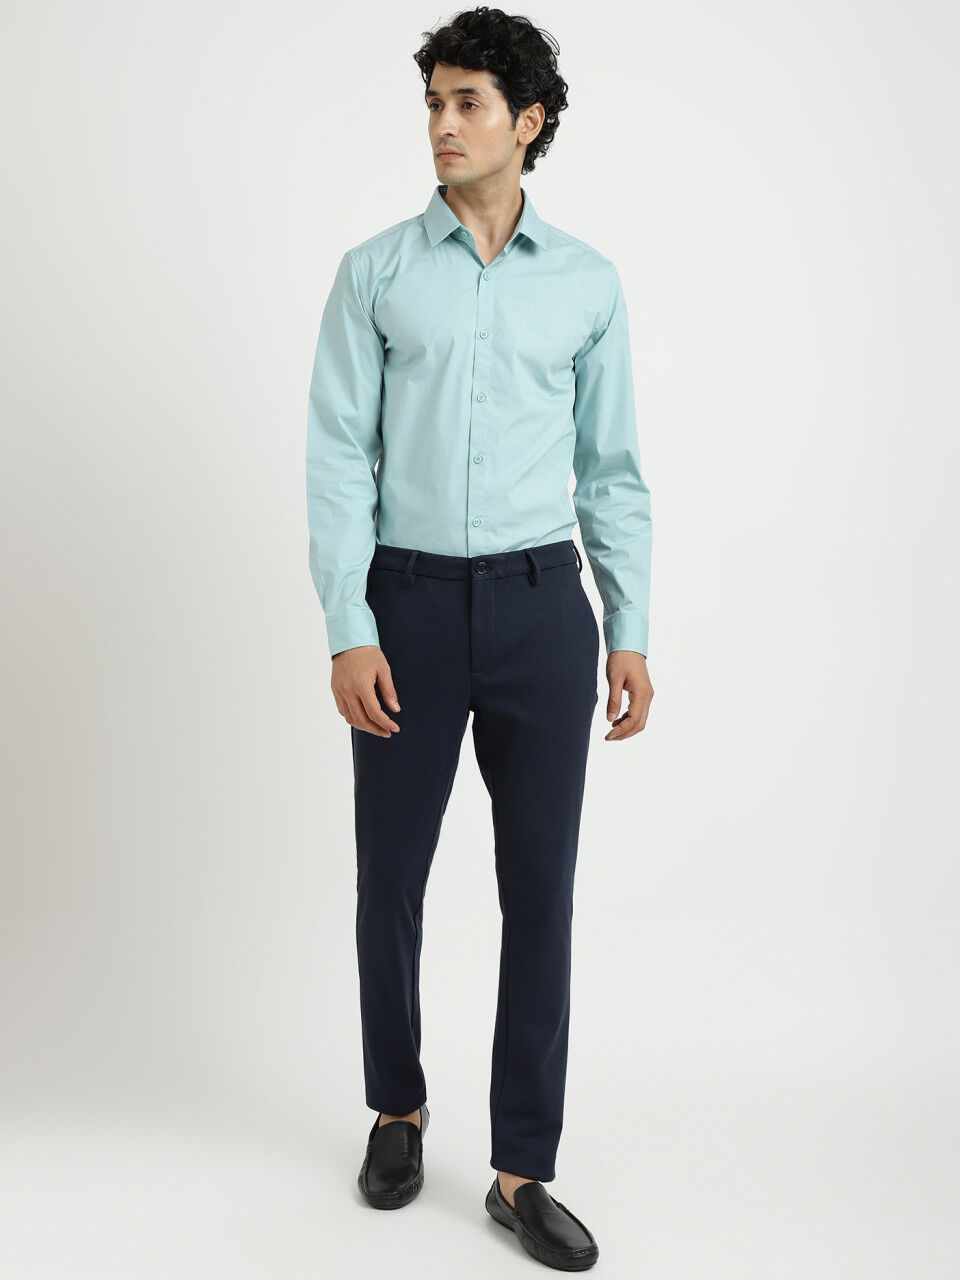 United Colors Of Benetton Sky Blue Shirt